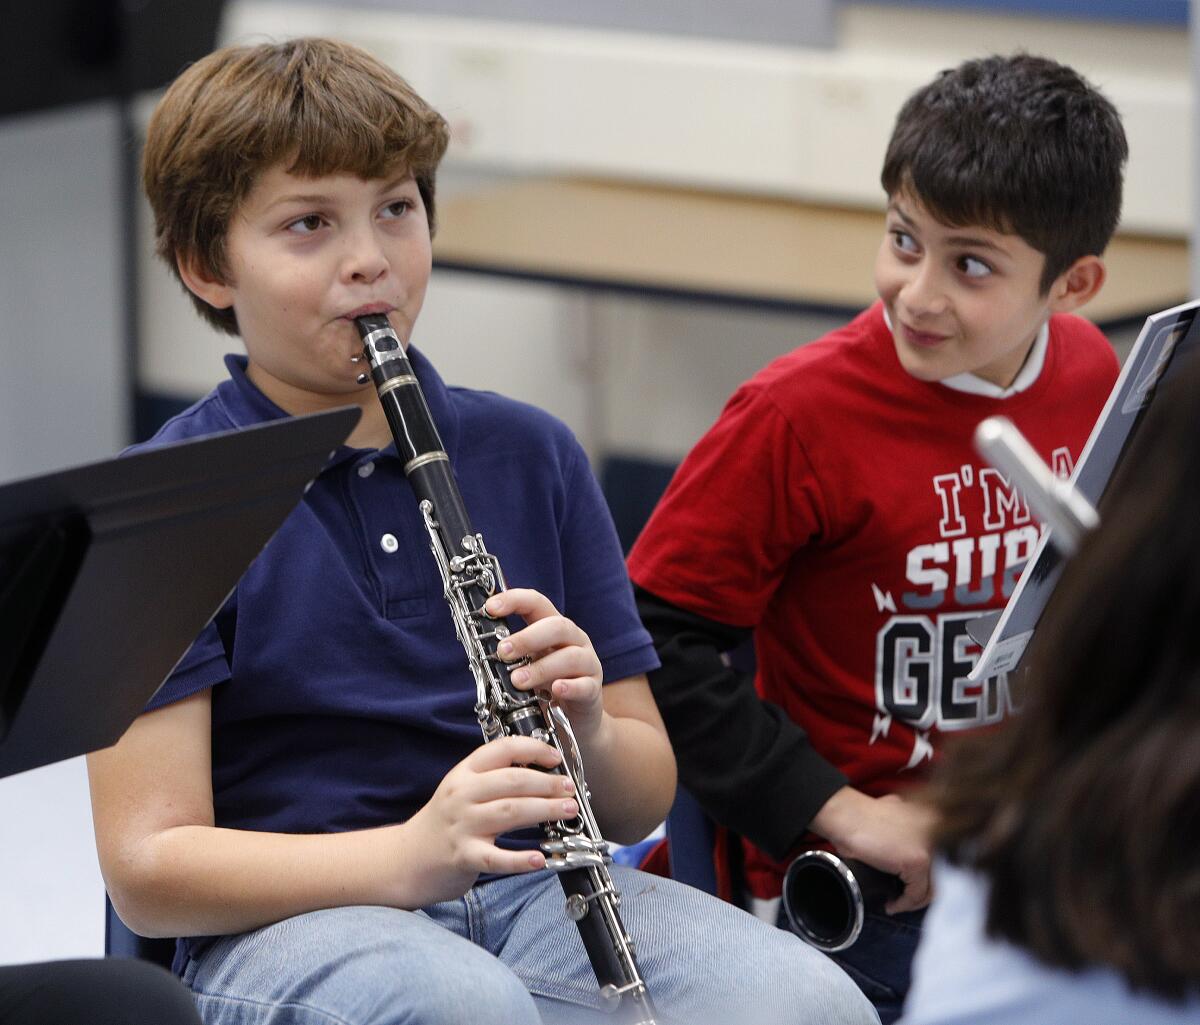 Nicholas Rogers, under the watchful eyes of fellow clarinetist Alex Paranyan, demonstrates a problem he is having with his clarinet at the Caesura Youth Orchestra rehearsal at Cerritos Elementary School in Glendale on Tuesday. A fundraiser for the music program will be held at a performance called "A Portrait of Fall" at the Glendale City Church on Sunday at 4 p.m.